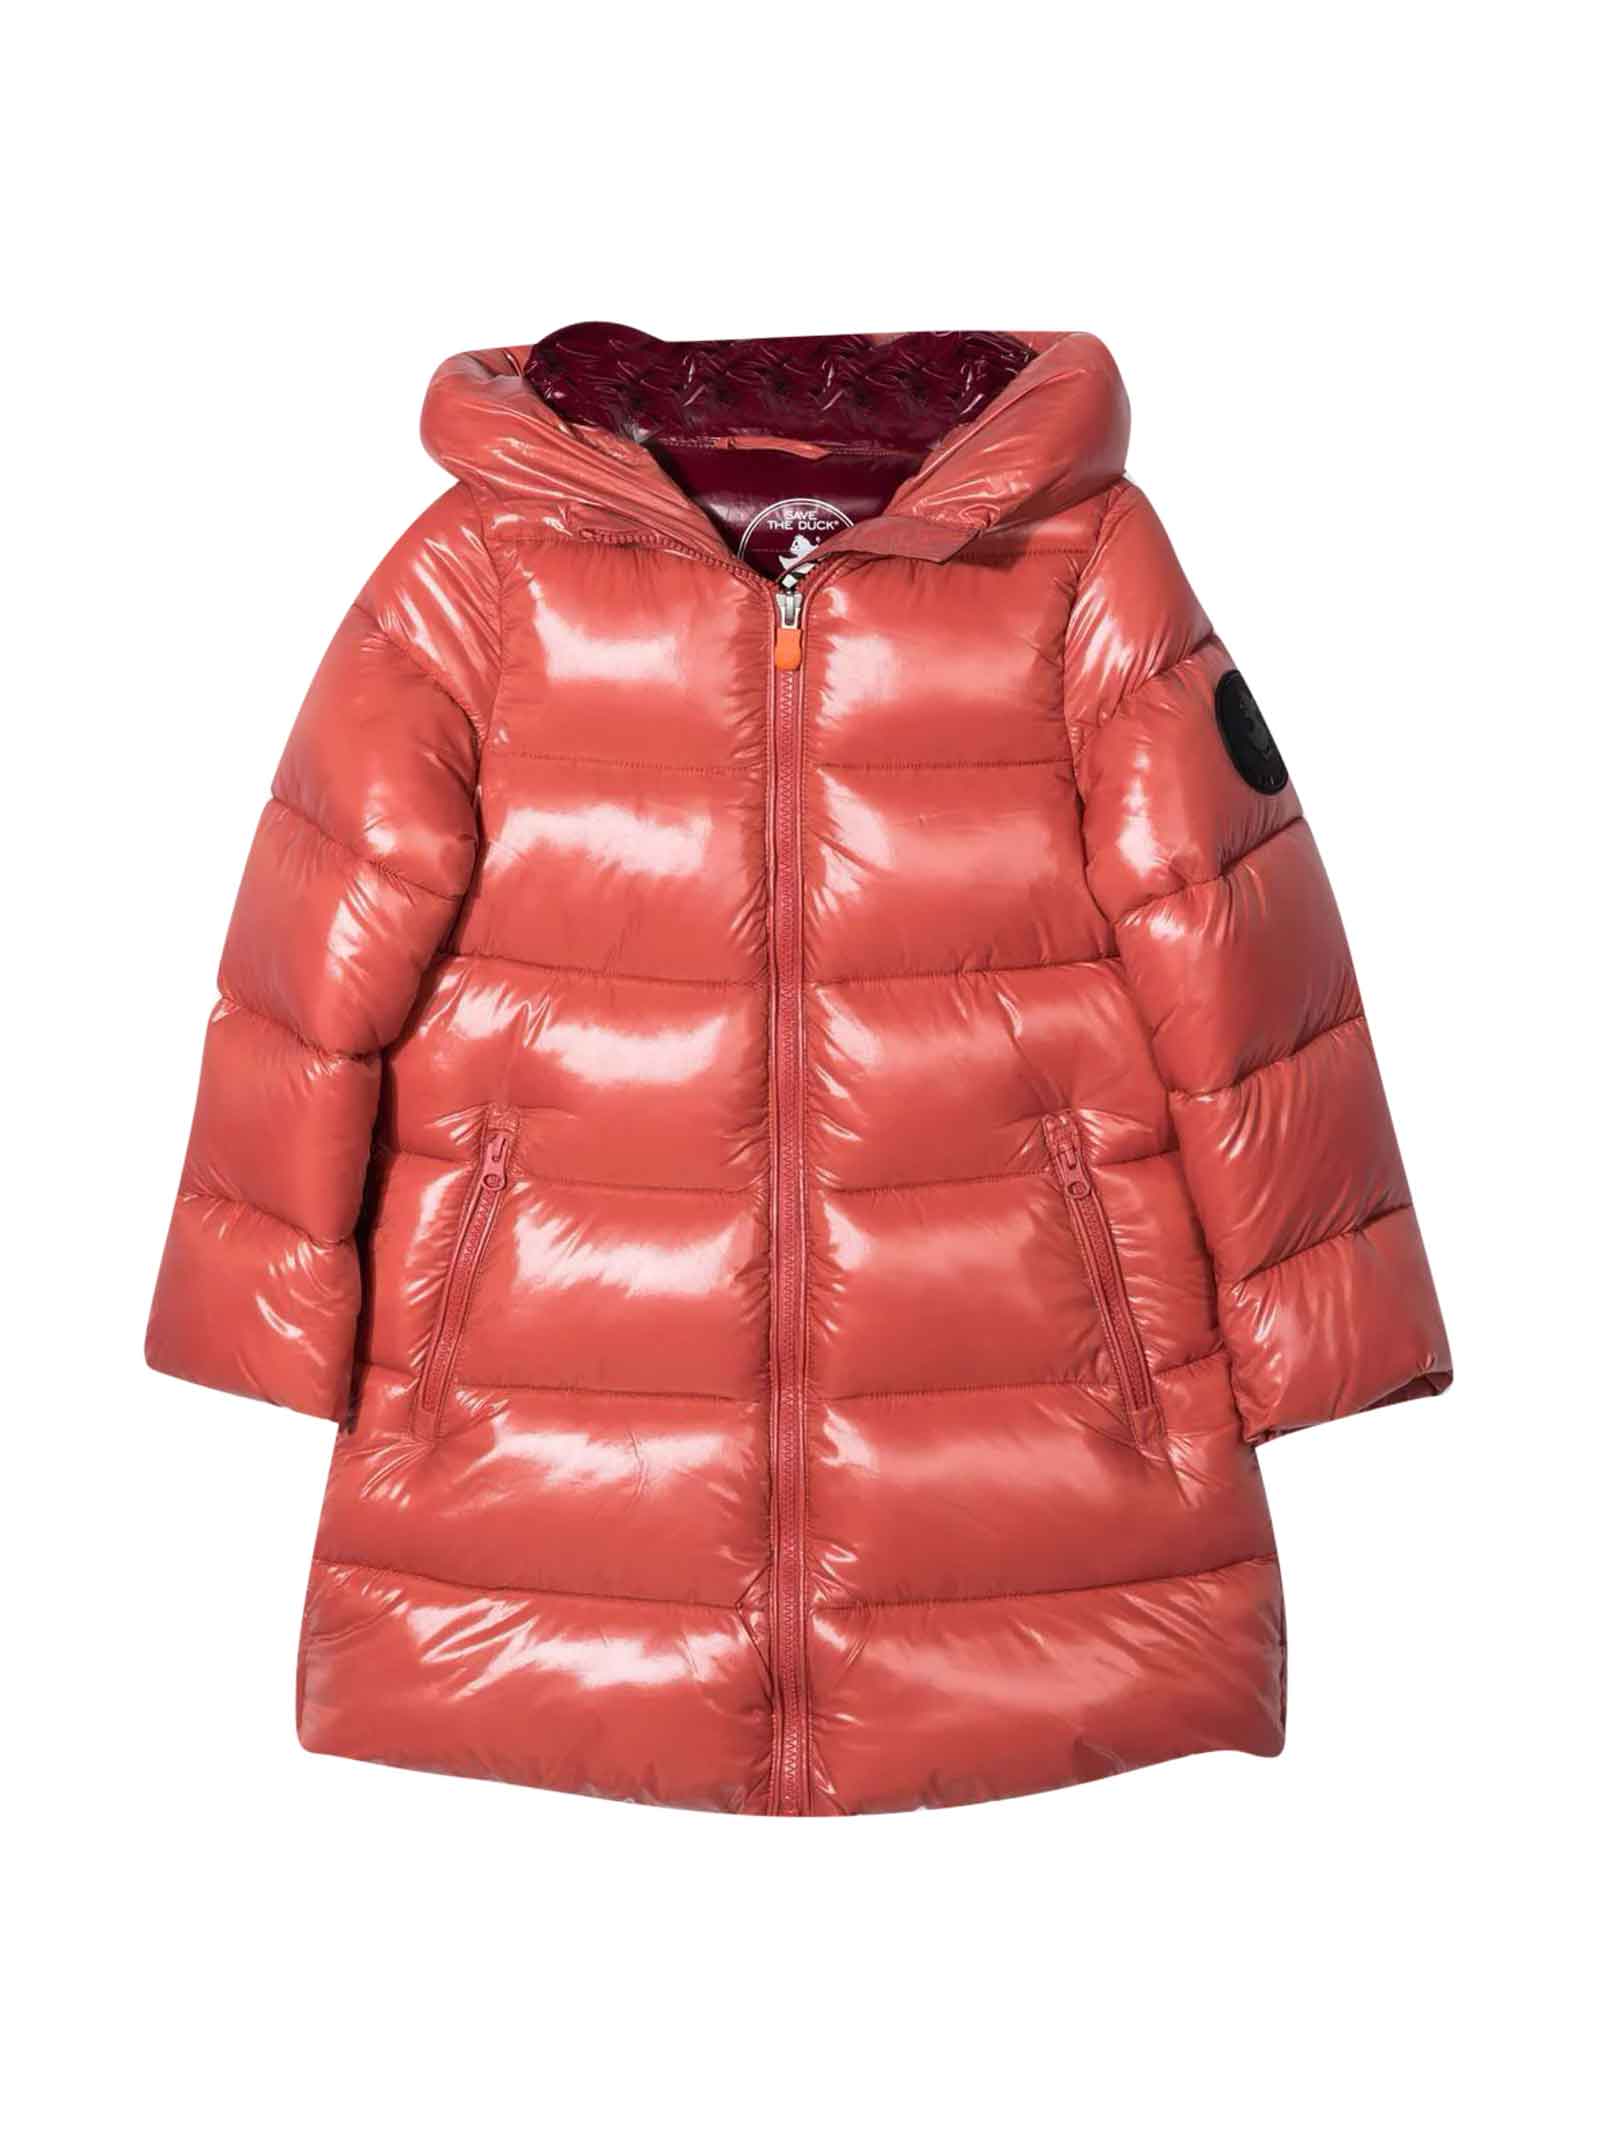 Save the Duck Coral Long Teen Down Jacket Kids